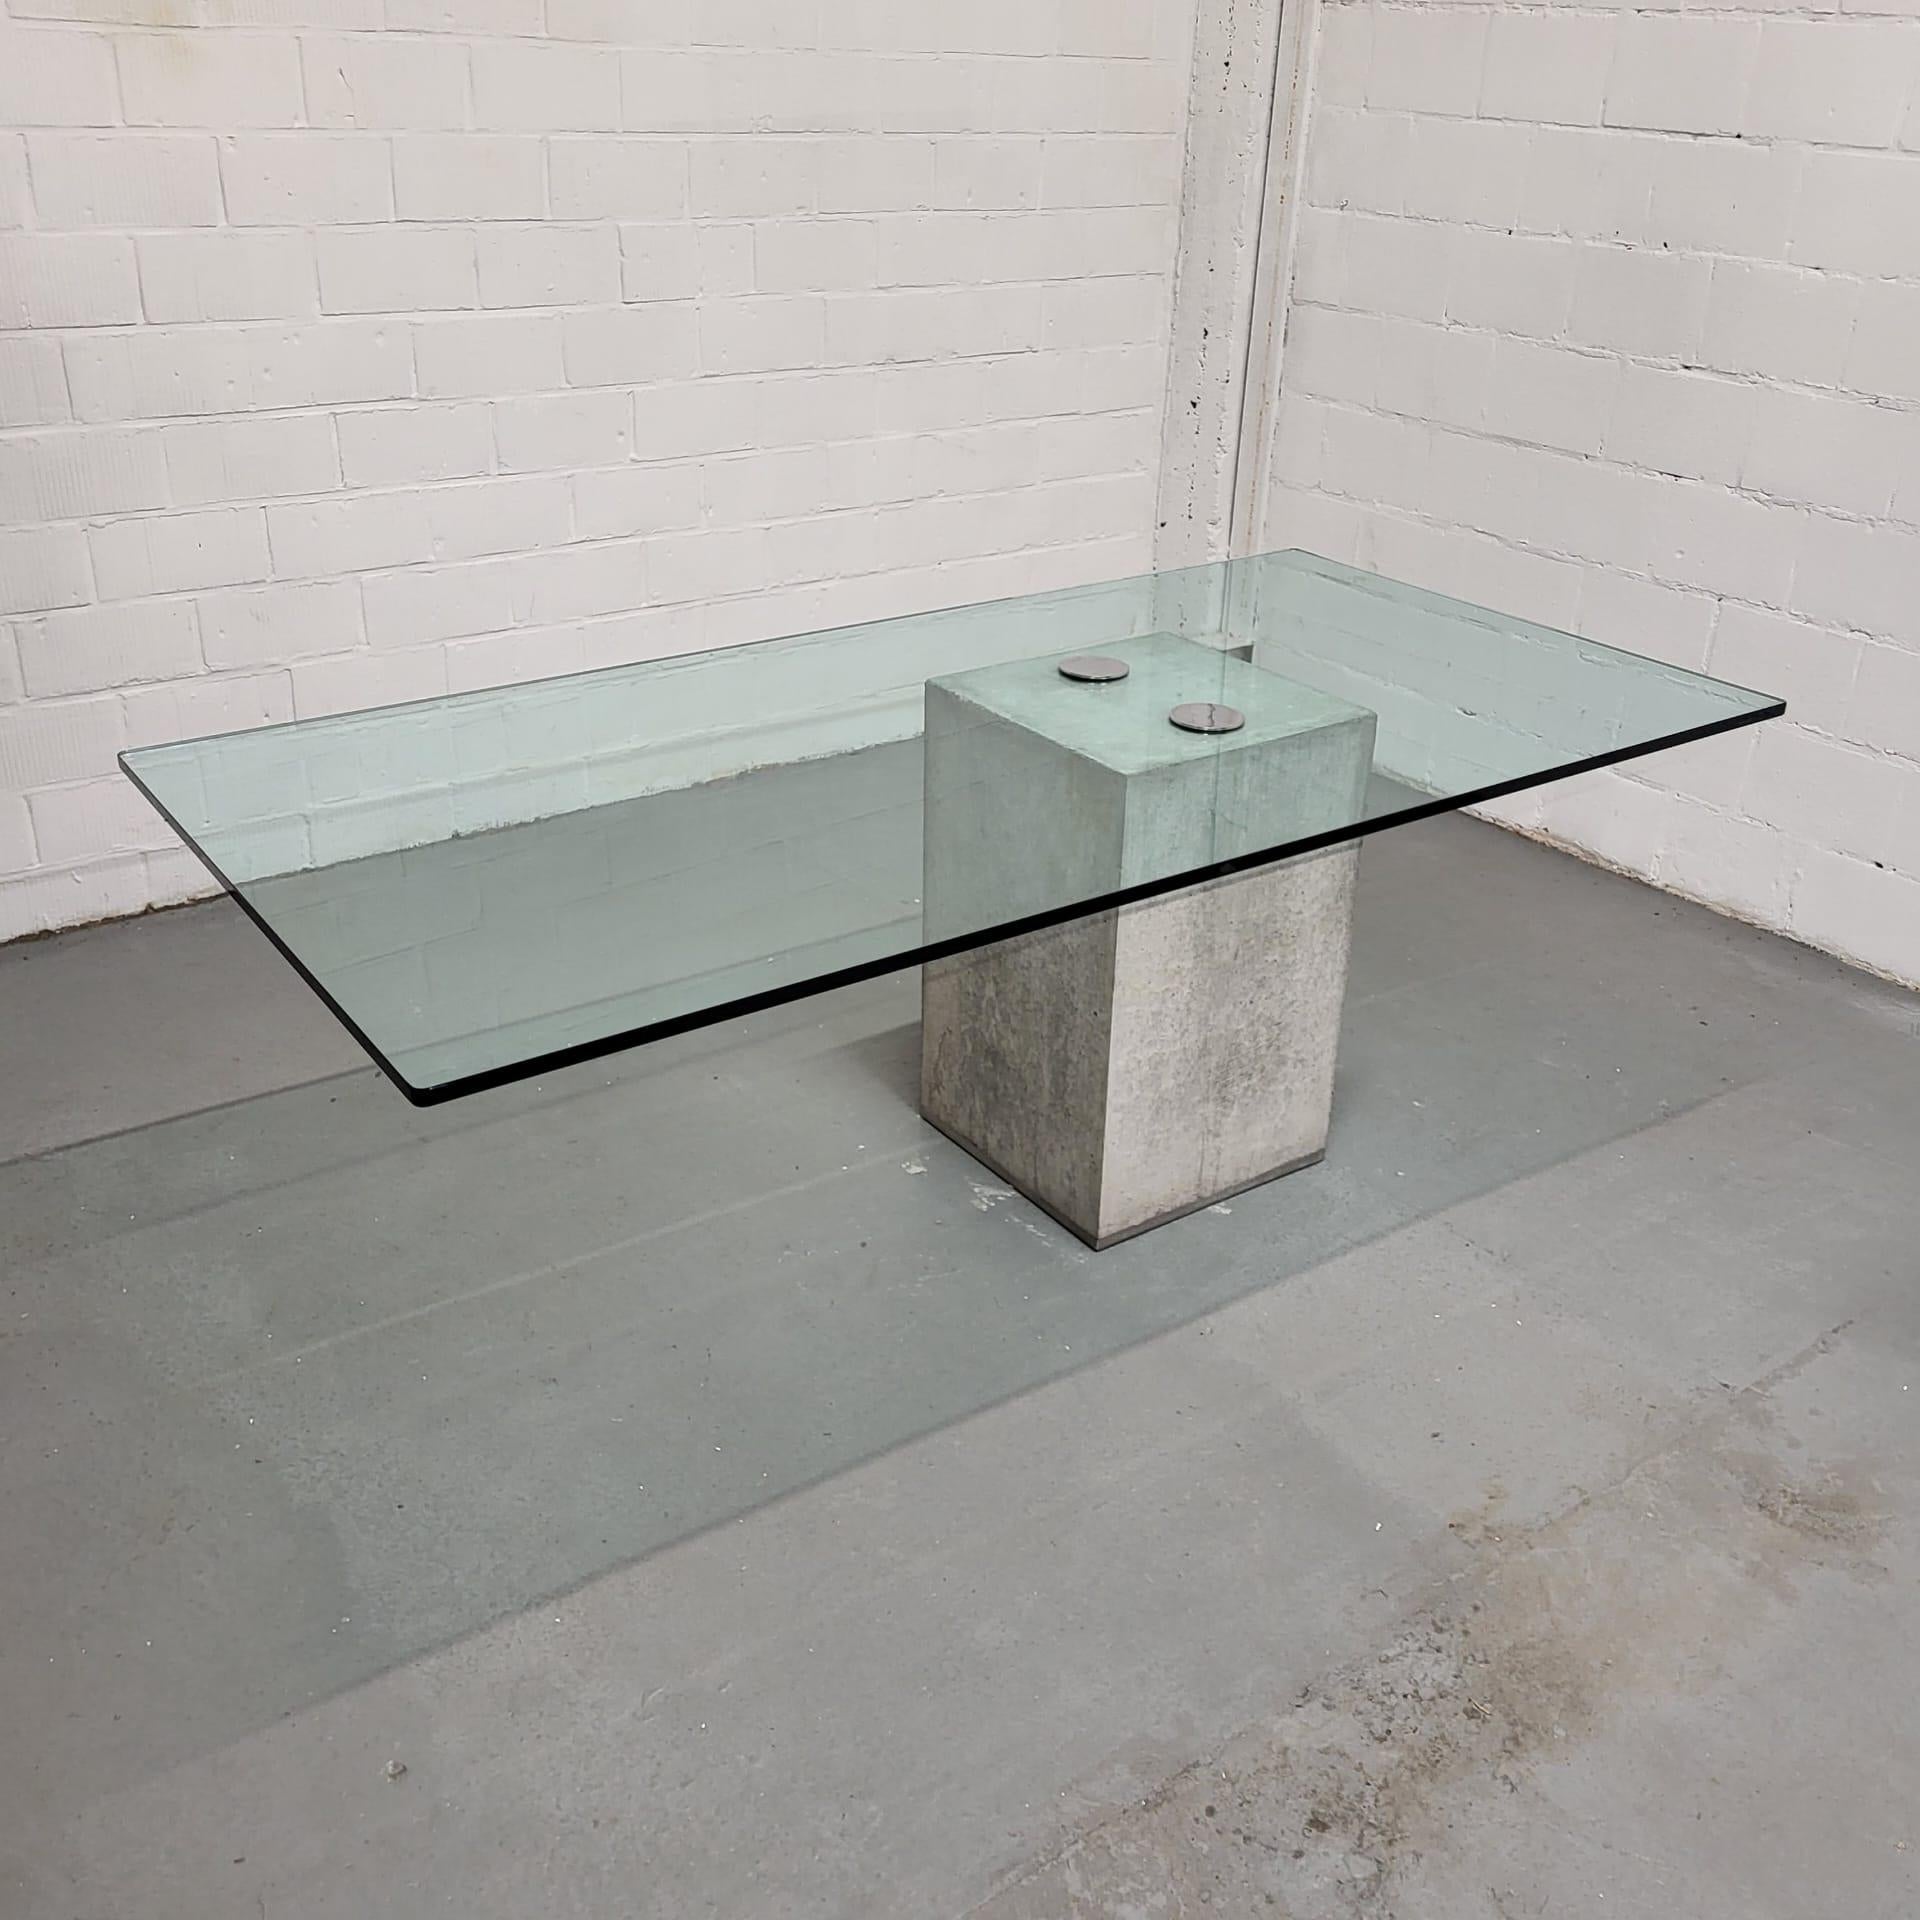 Concrete and chrome dining table with thick clear glass top.

Designed by Sergio and Giorgio Saporiti for Saporiti.

This concrete dining table is a beautiful eye catcher and unique thanks to the not centered table base. 

The top is strongly